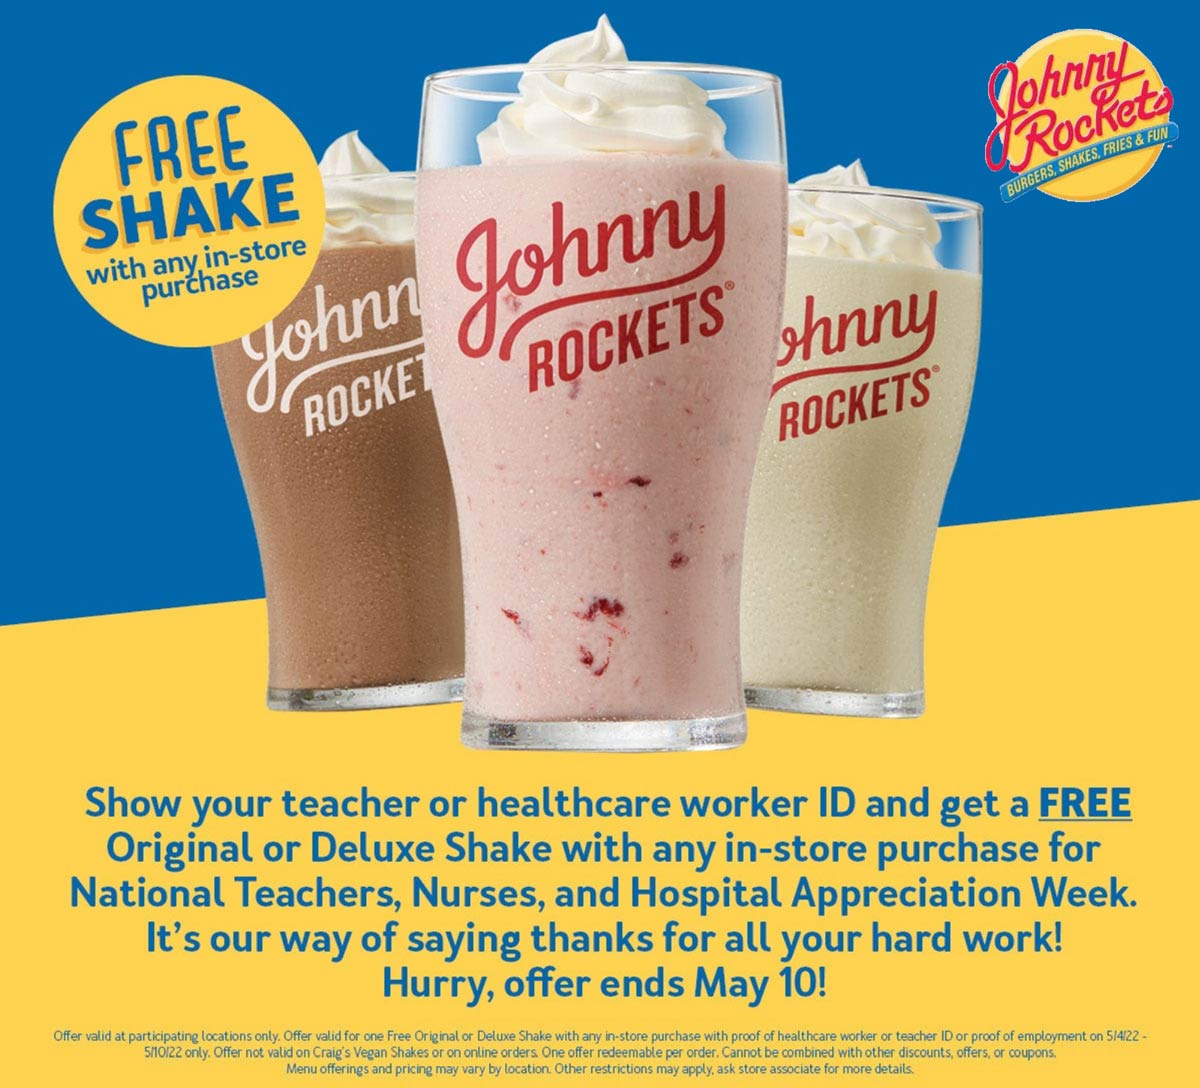 Johnny Rockets coupons & promo code for [December 2022]